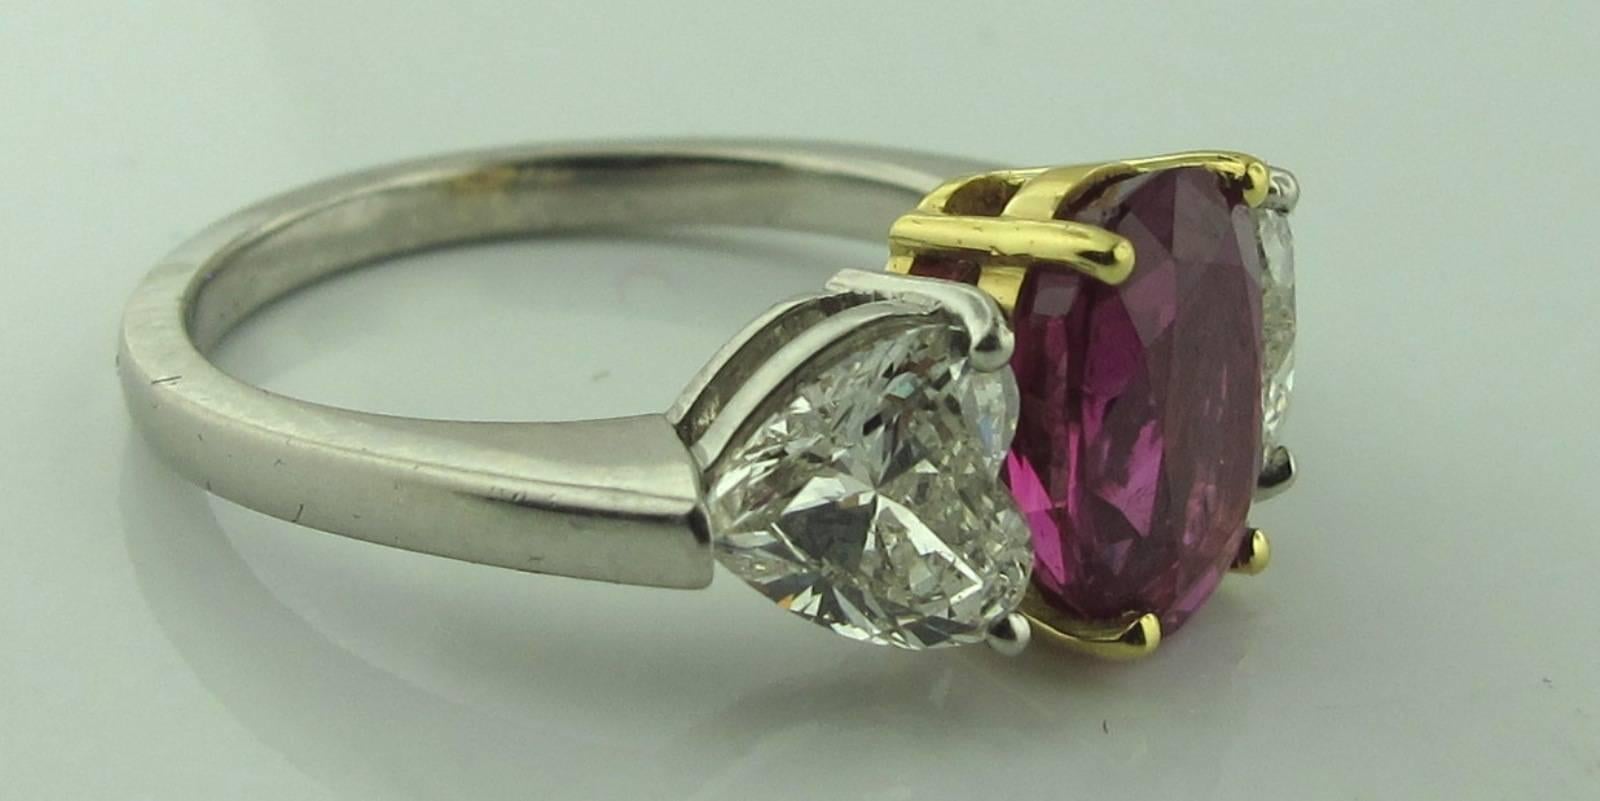 GIA Certified 2.81 carat Oval Ruby set in Yellow Gold, with two heart shaped diamonds on either side with a total diamond weight of 1.63 carats set in platinum.  I color, VS-2 clarity. The ruby is accompanied by a GIA certificate BURMA UNHEATED.  